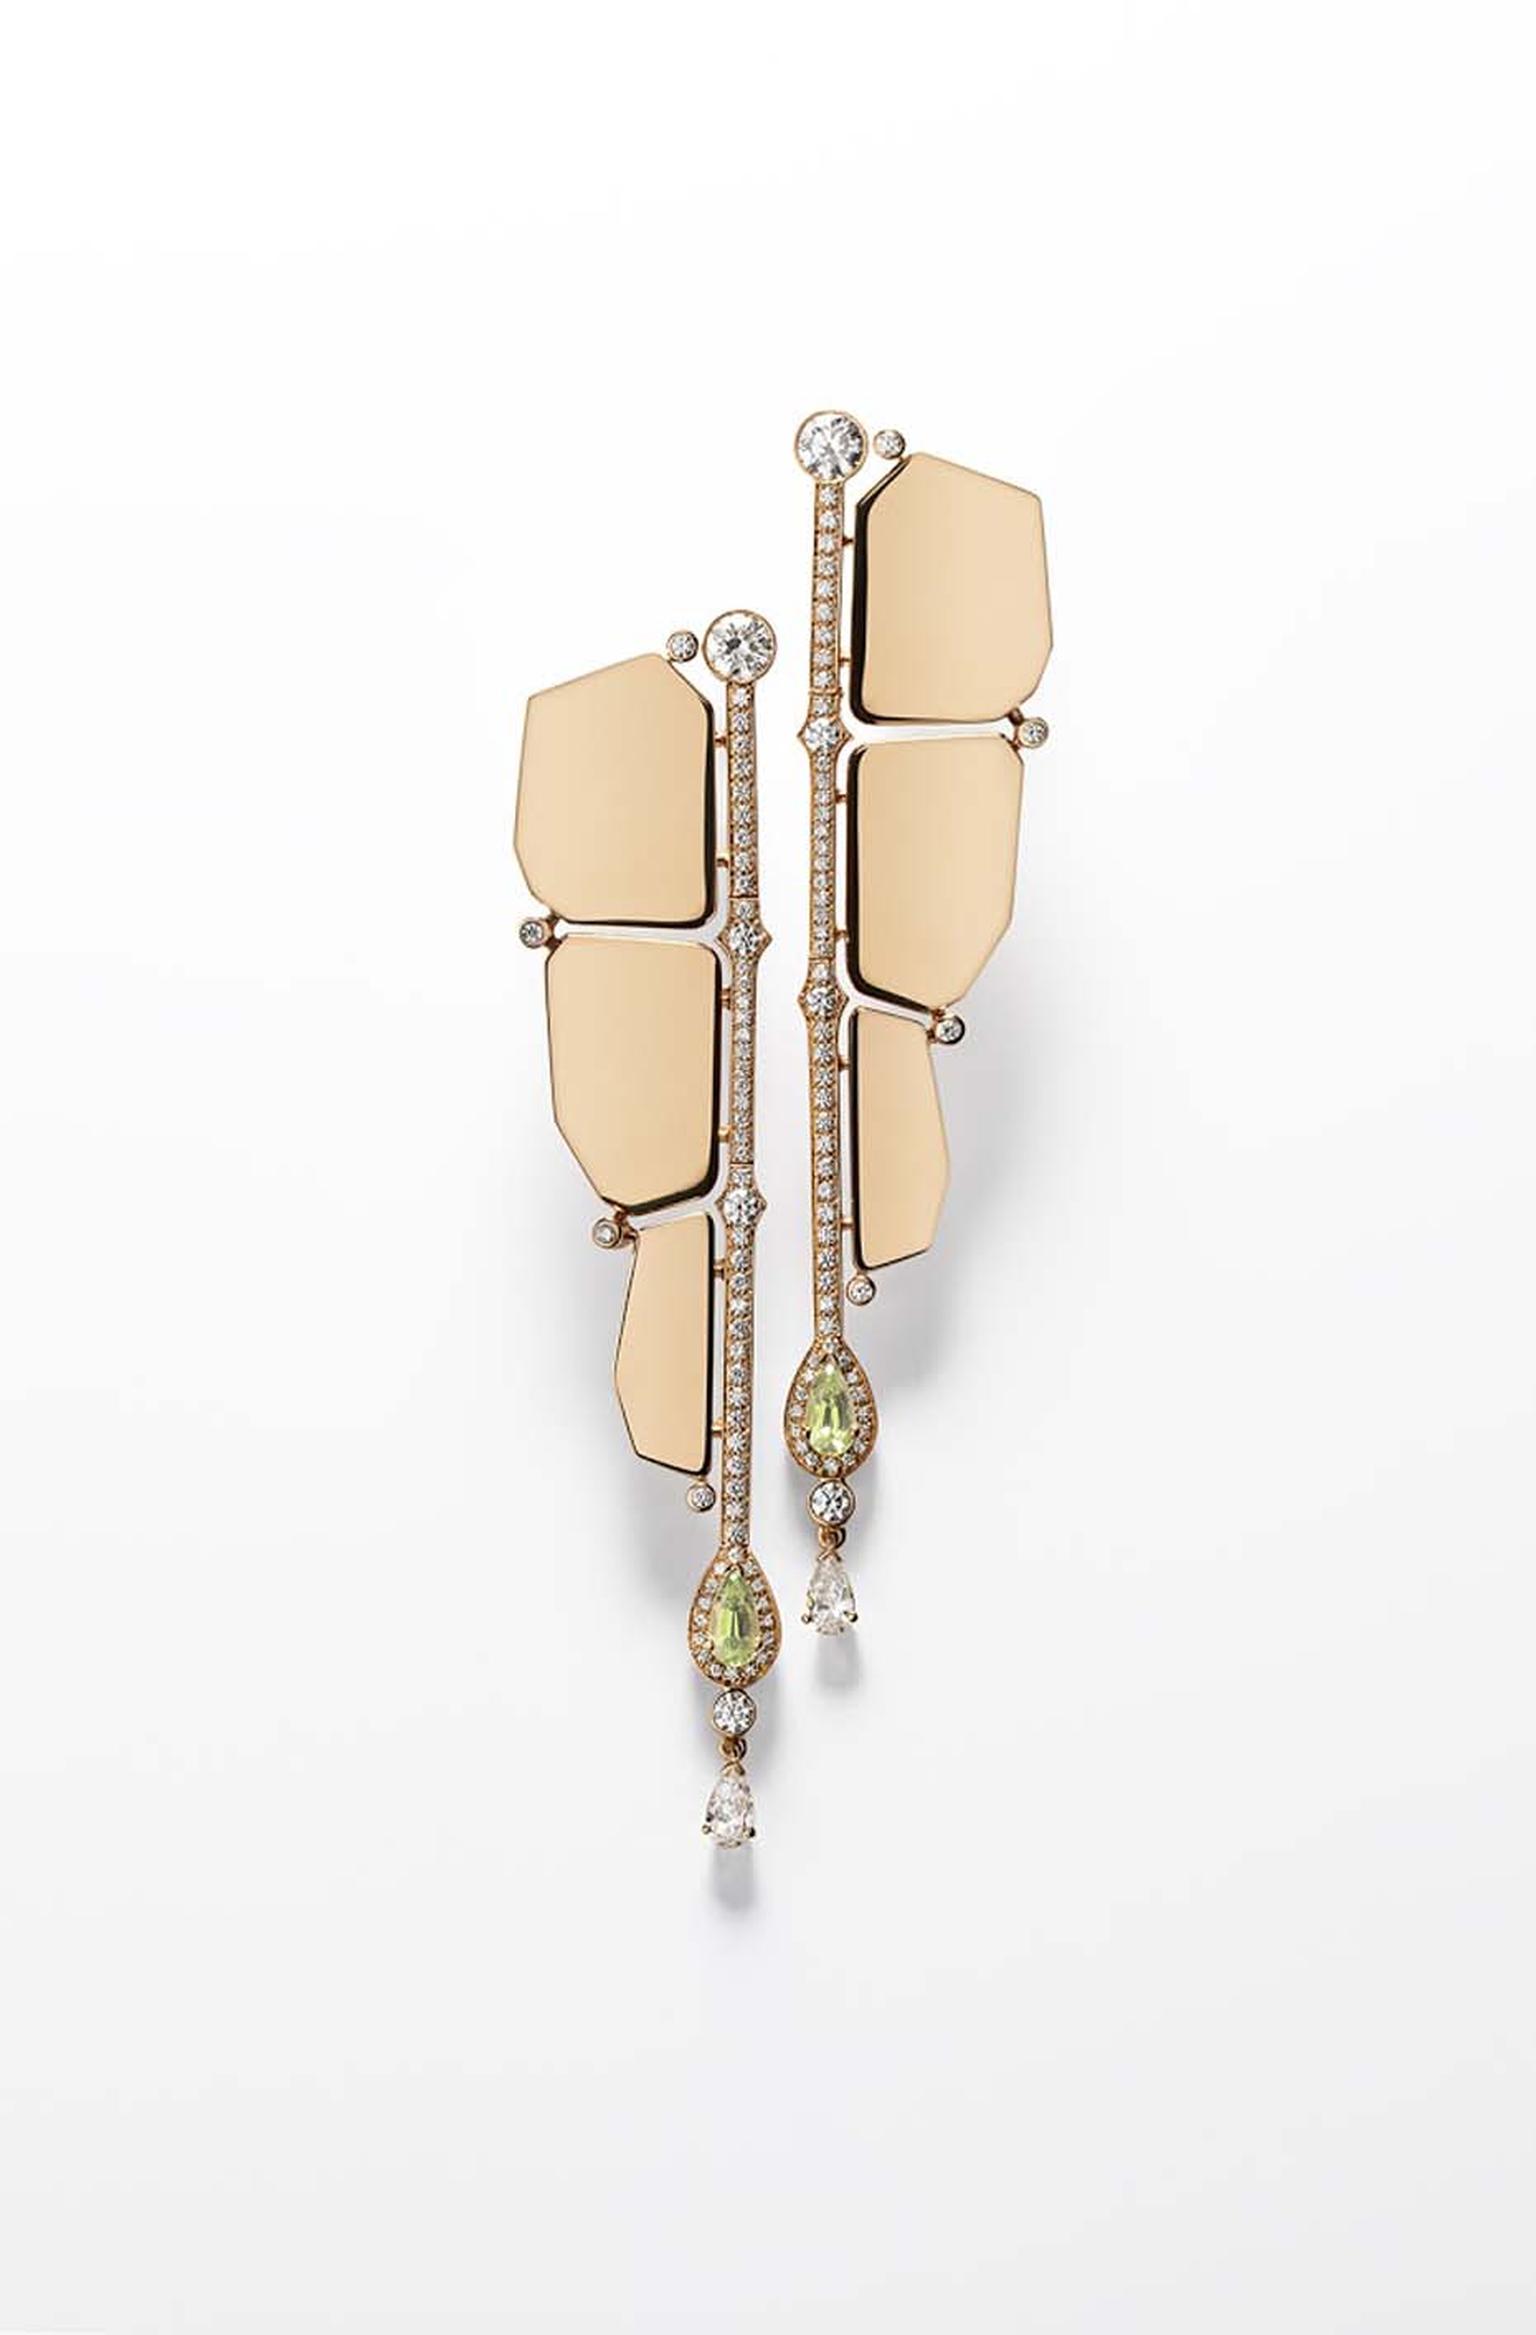 Hermès Niloticus Boutons d'Oreilles rose gold earrings featuring pear-shaped peridots and brilliant-cut diamonds